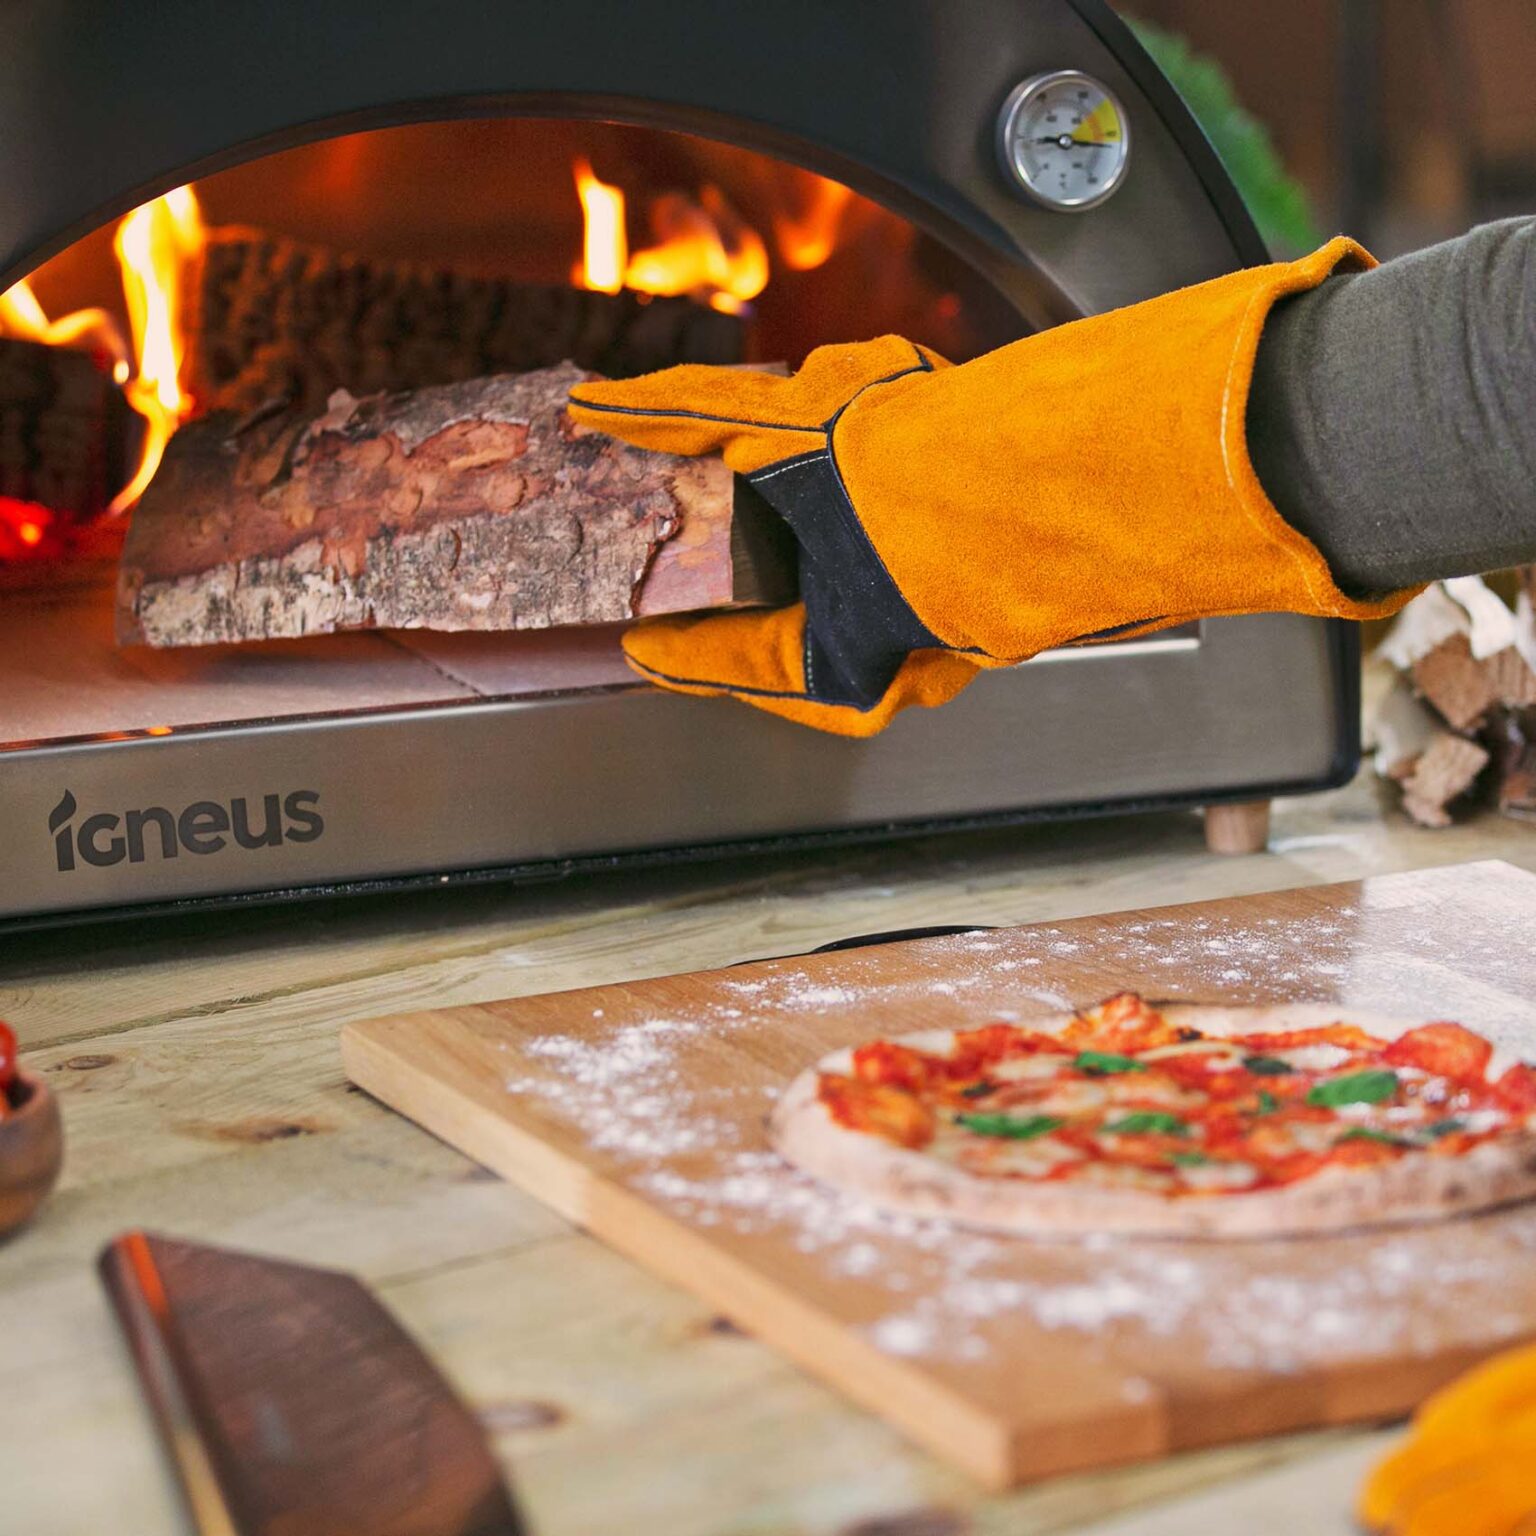 Heat resistant gloves - Igneus wood fired pizza ovens uk